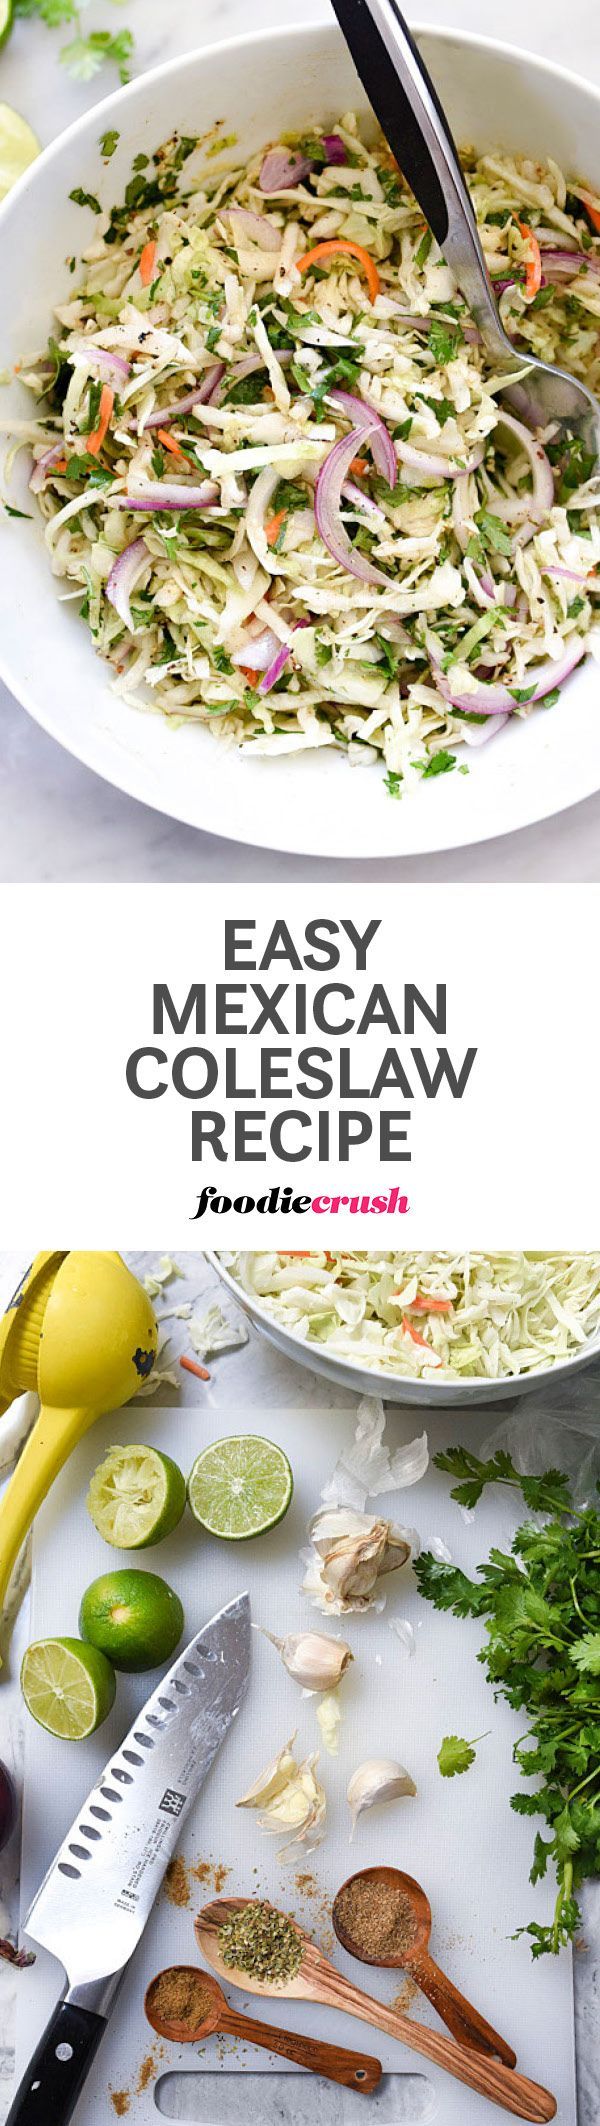 This super simple, fresh tasting Mexican flavored coleslaw is perfect for…